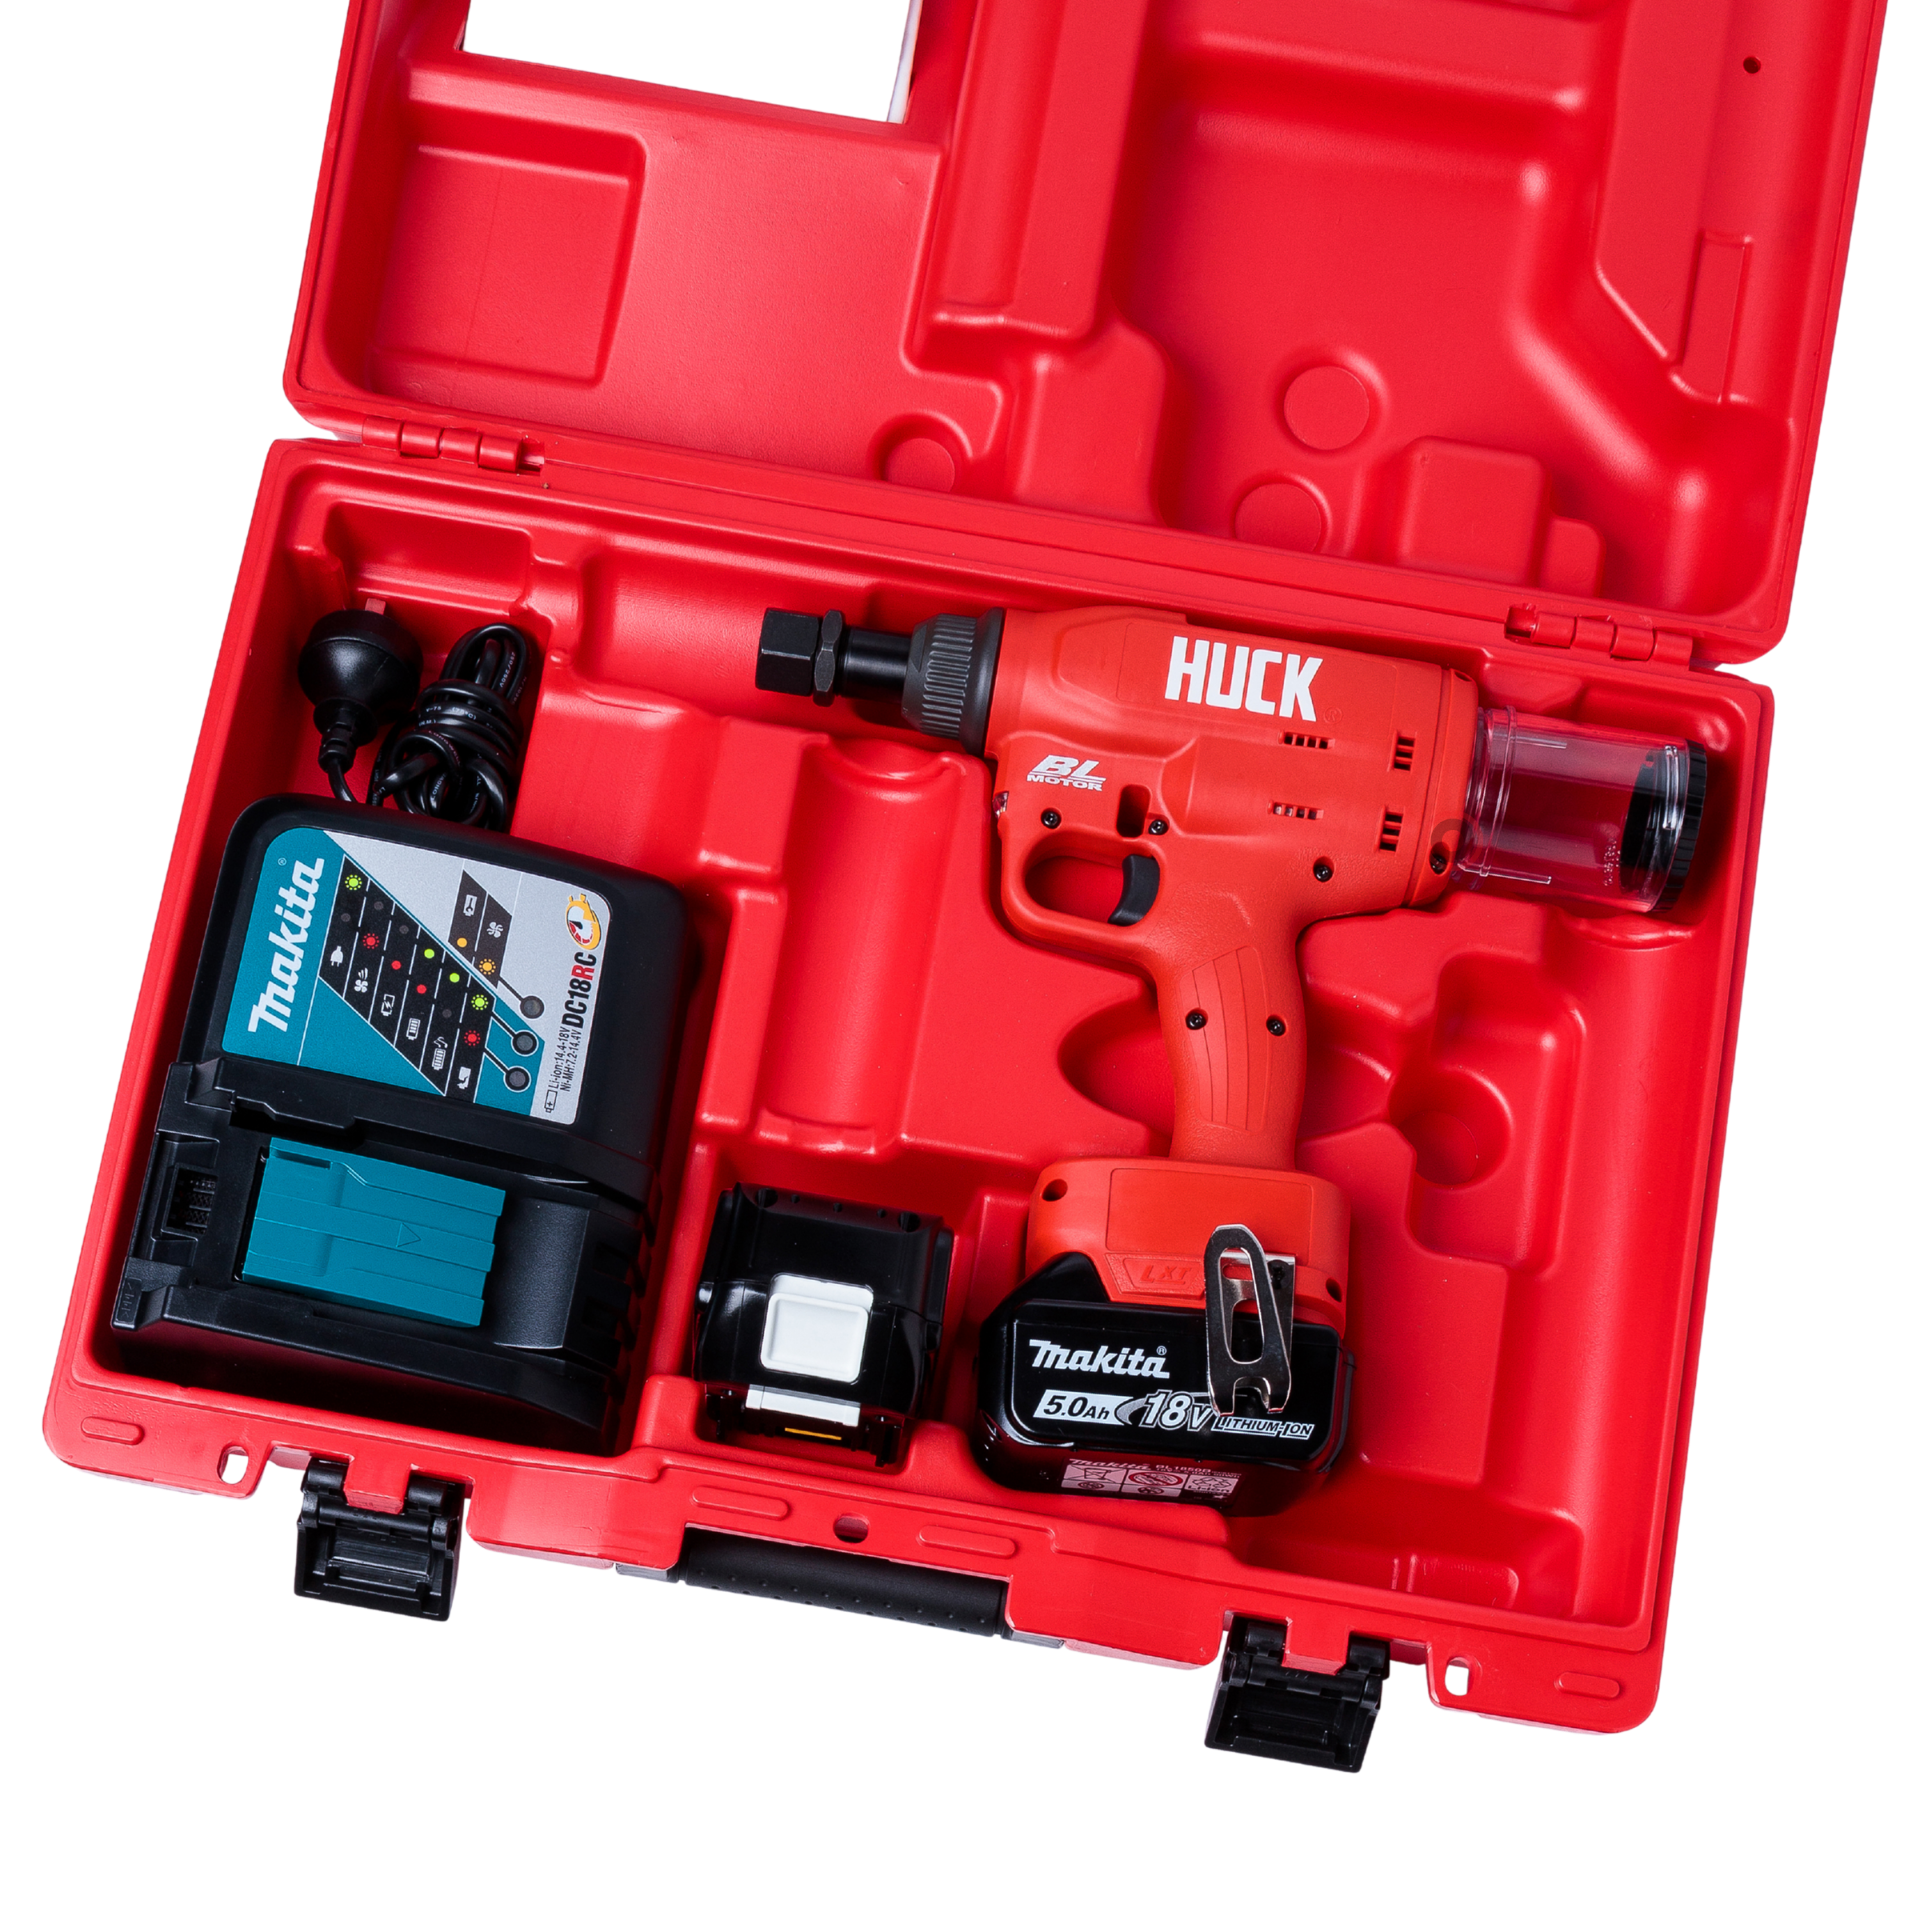 Battery Huck Makita Gun BV4500 within carry case, charger + batteries  